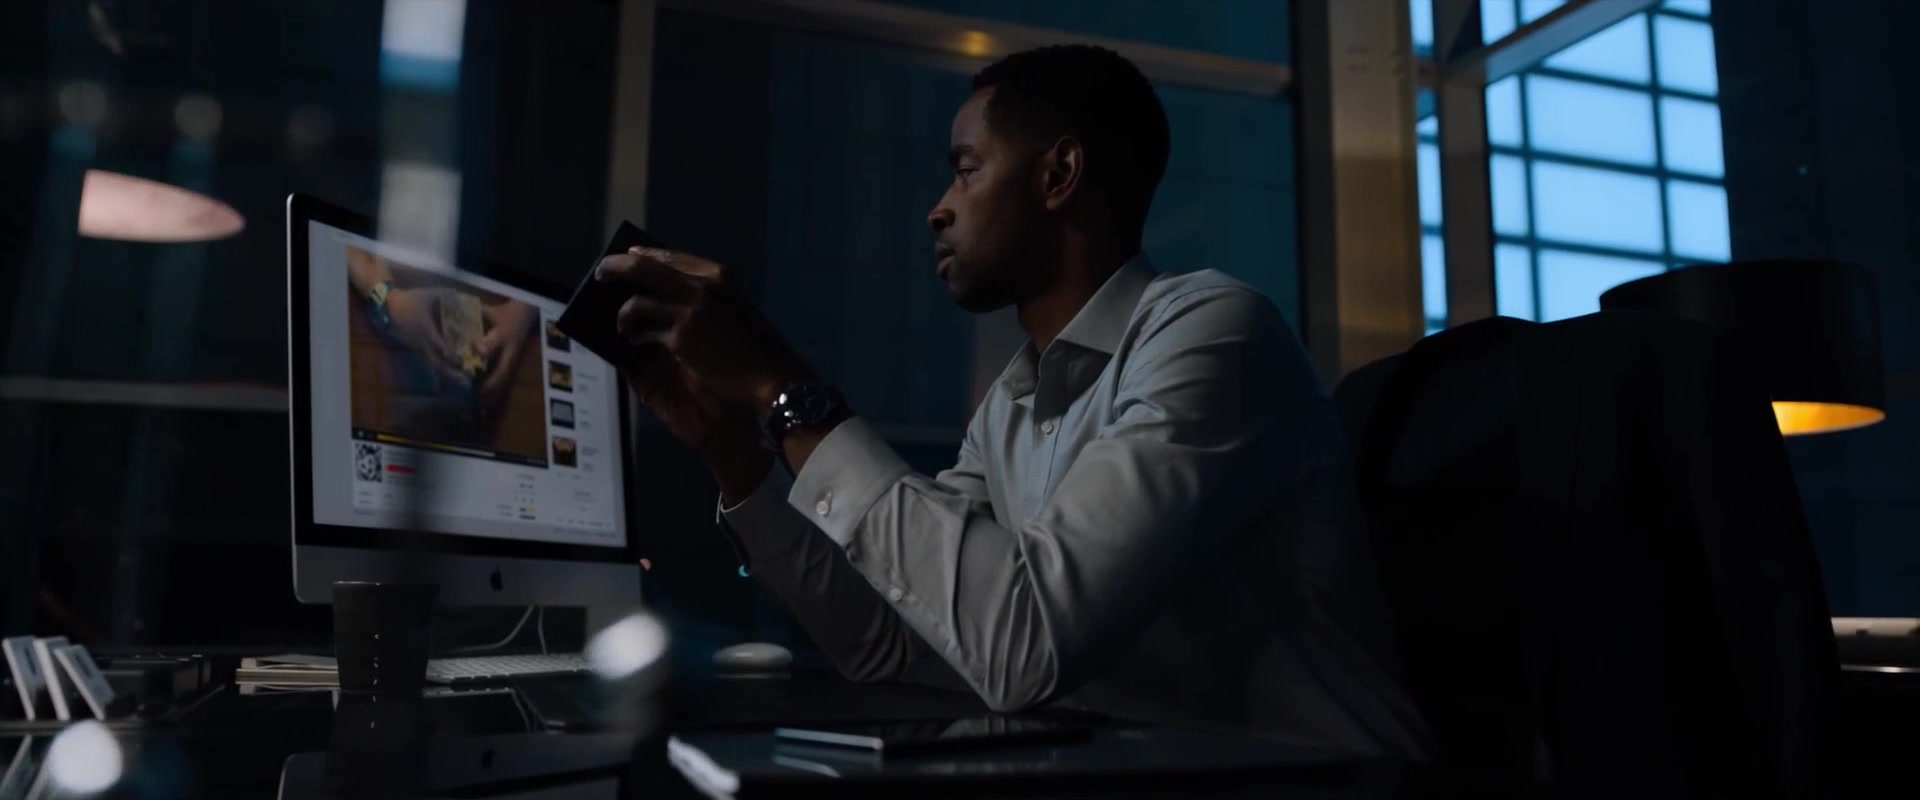 Apple iMac Computer Used by Jay Ellis in Escape Room (2019)